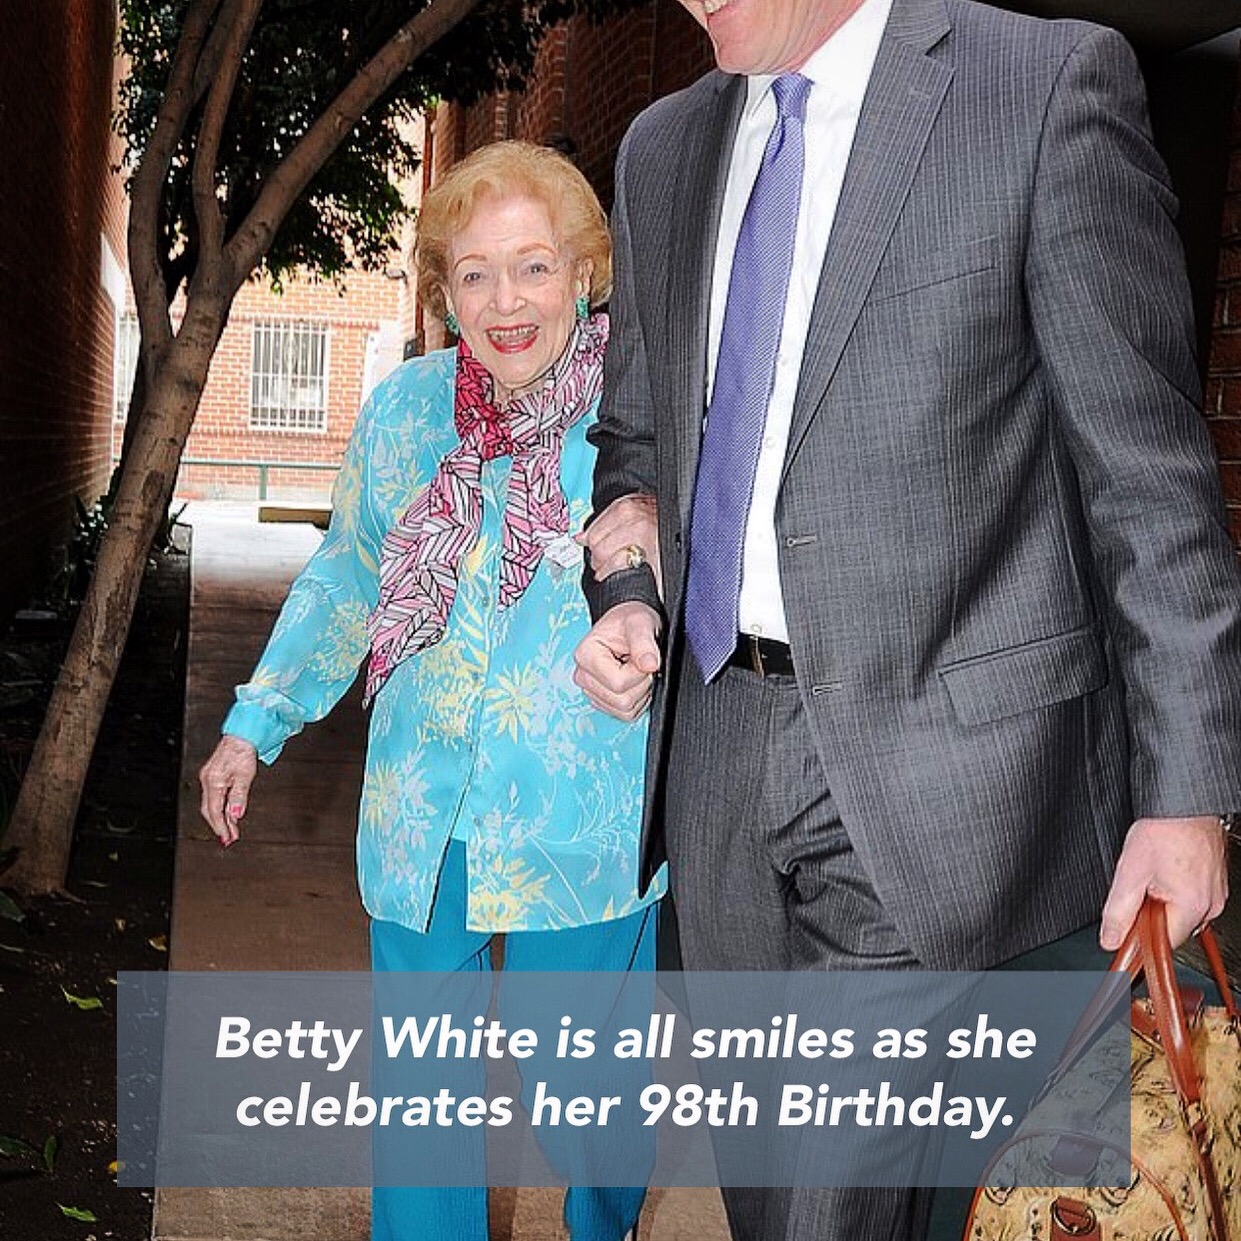 suit - Betty White is all smiles as she celebrates her 98th Birthday.